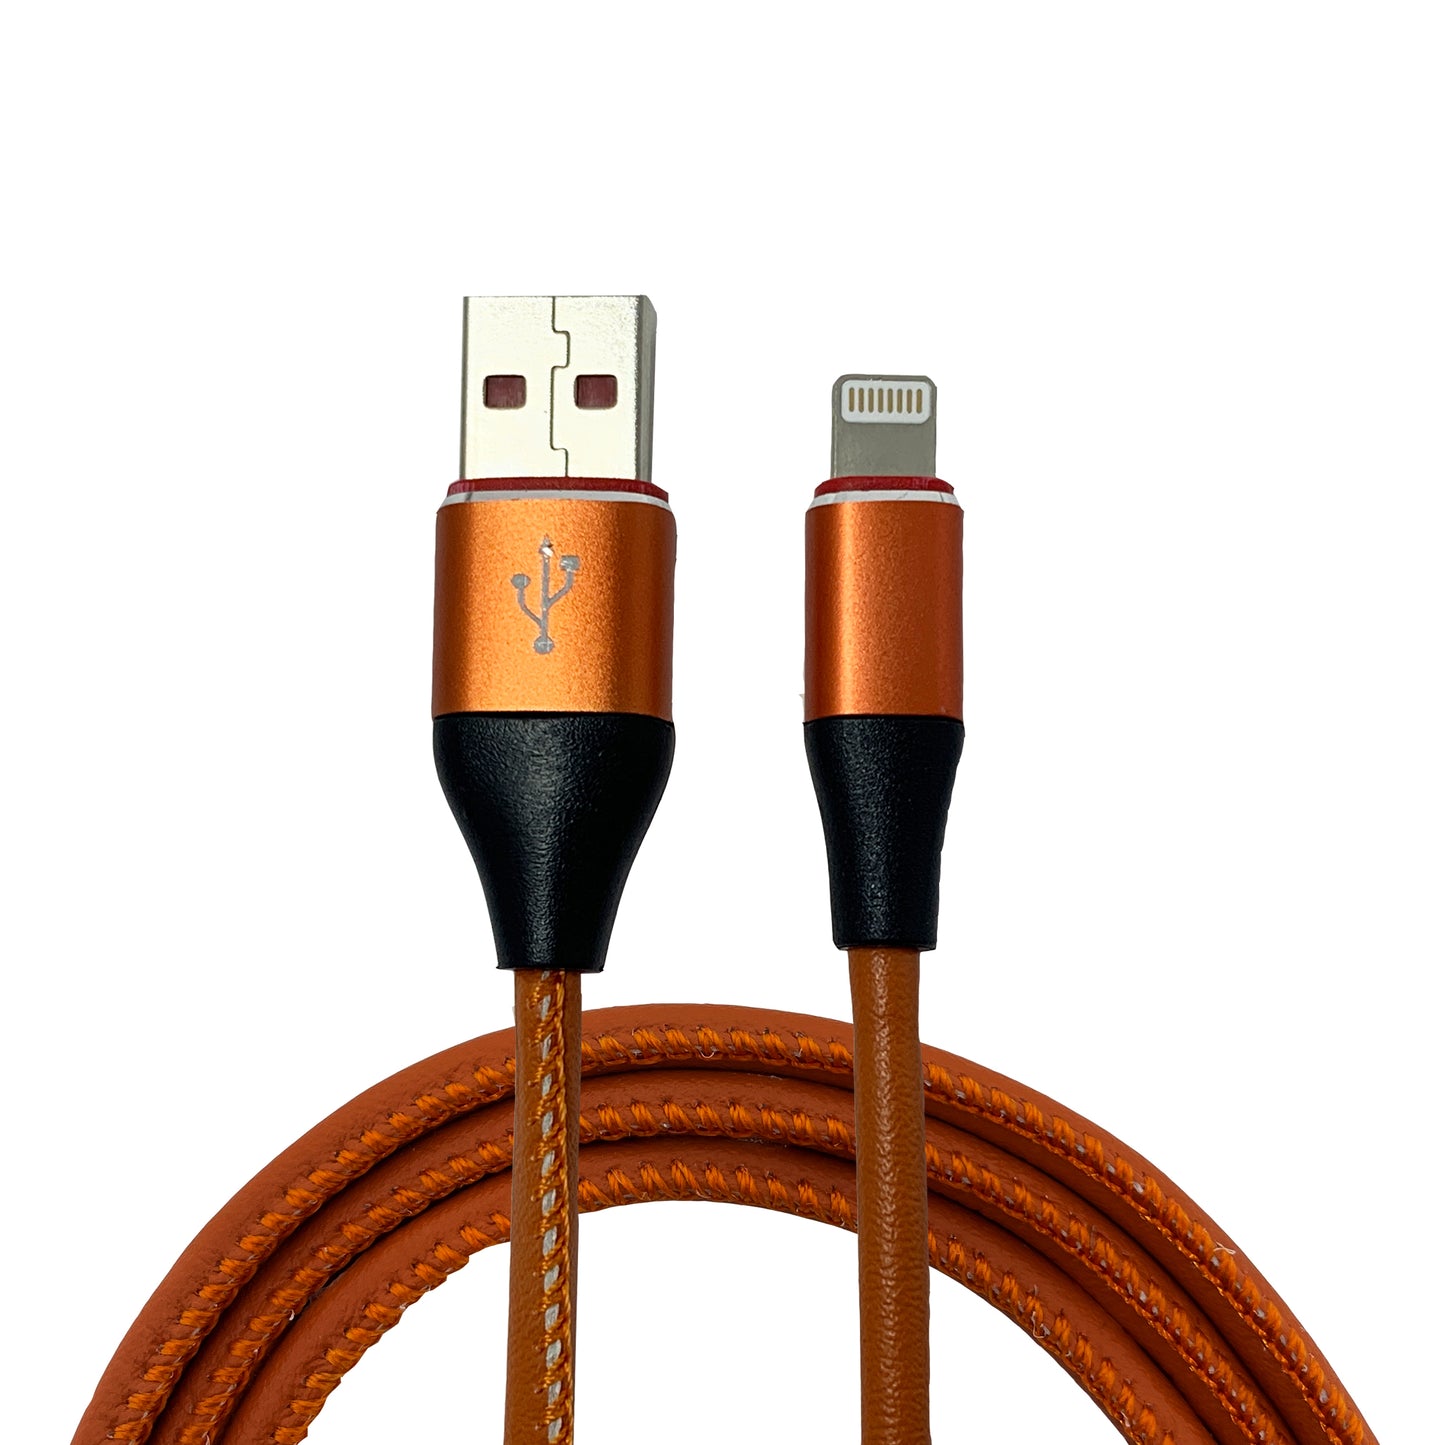 Motto Leather Wrapped Lightning iPhone Cable